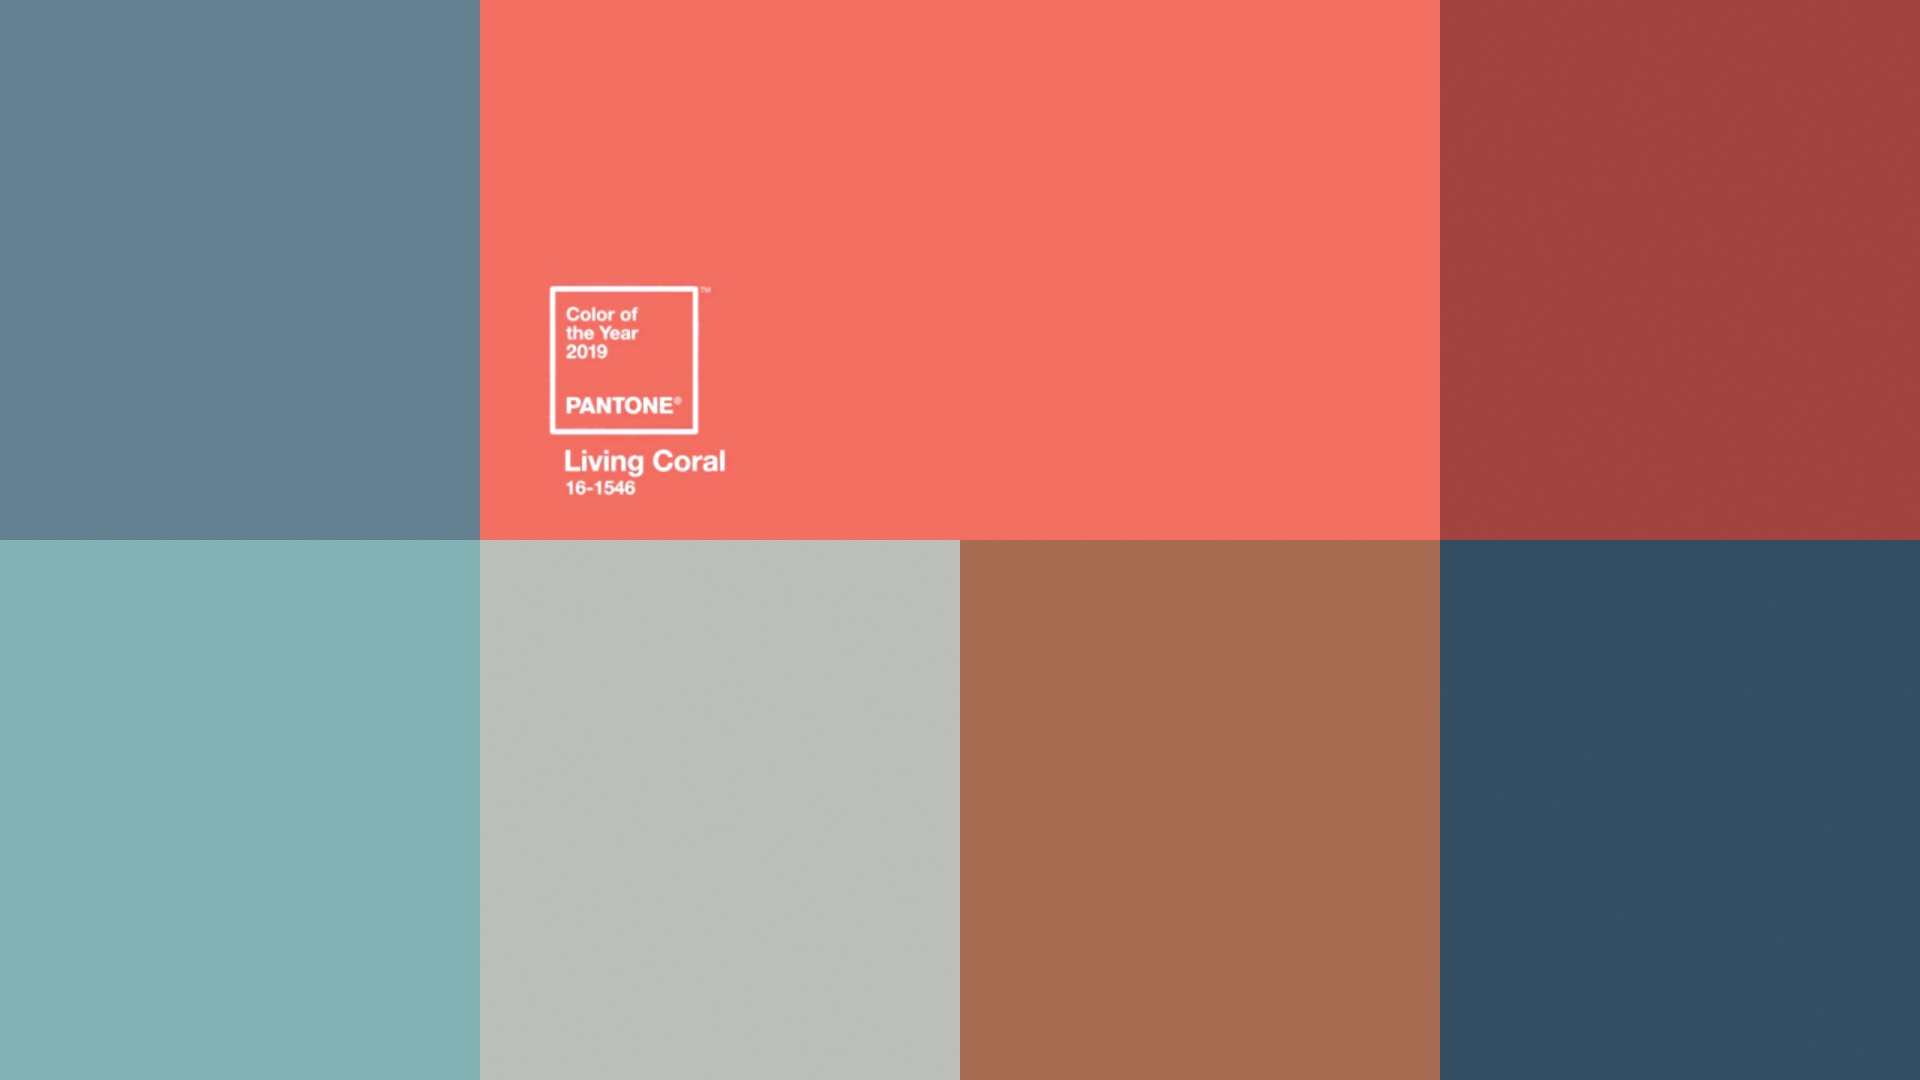 Pantone recently announced Living Coral (16-15146) as 2019’s color of the year. Pantone first began choosing a yearly color in 2000.